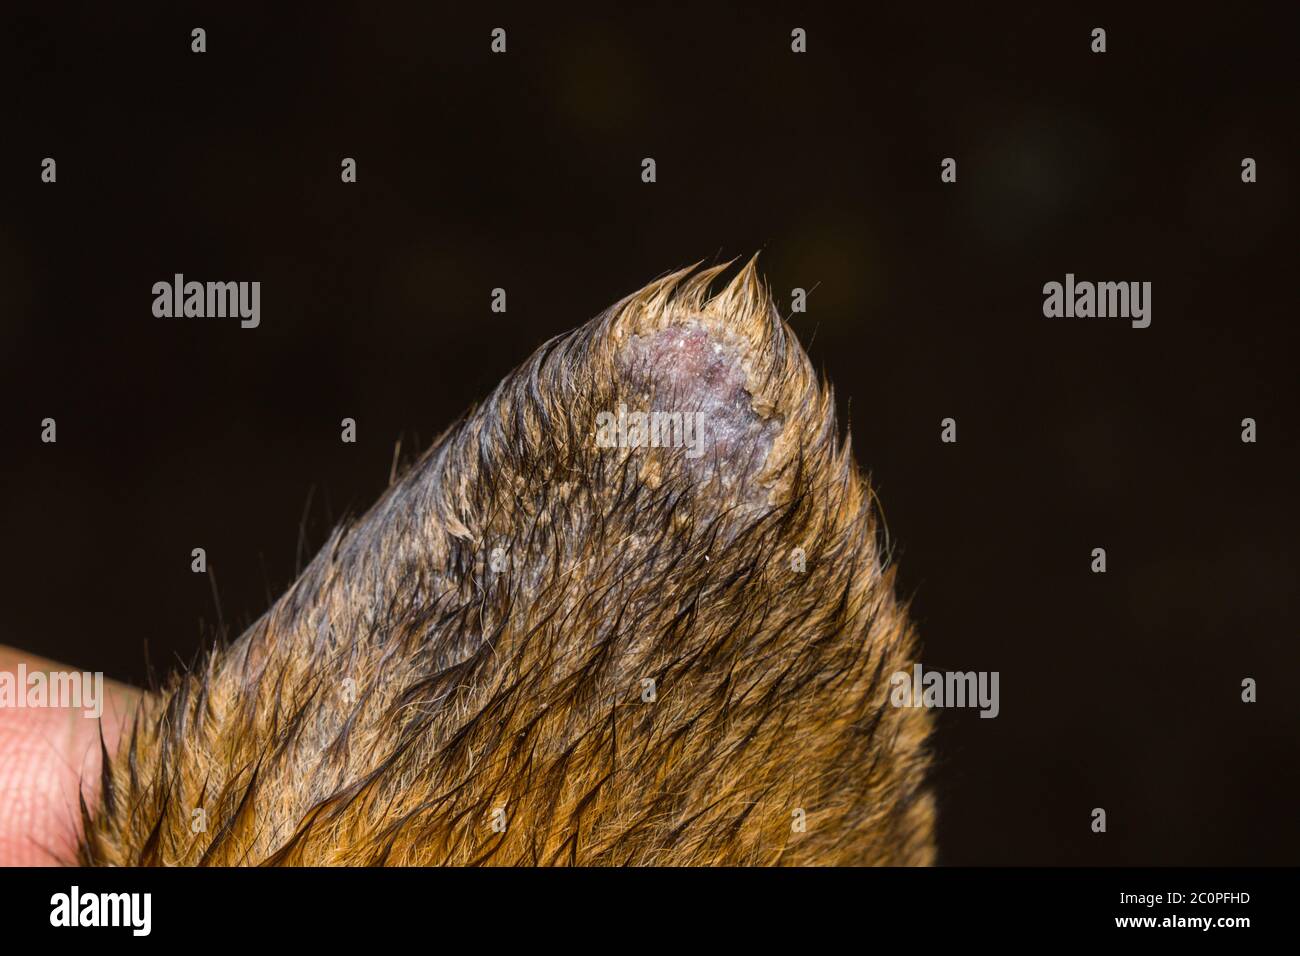 close-up photo of a dog ear with vasculitis Stock Photo